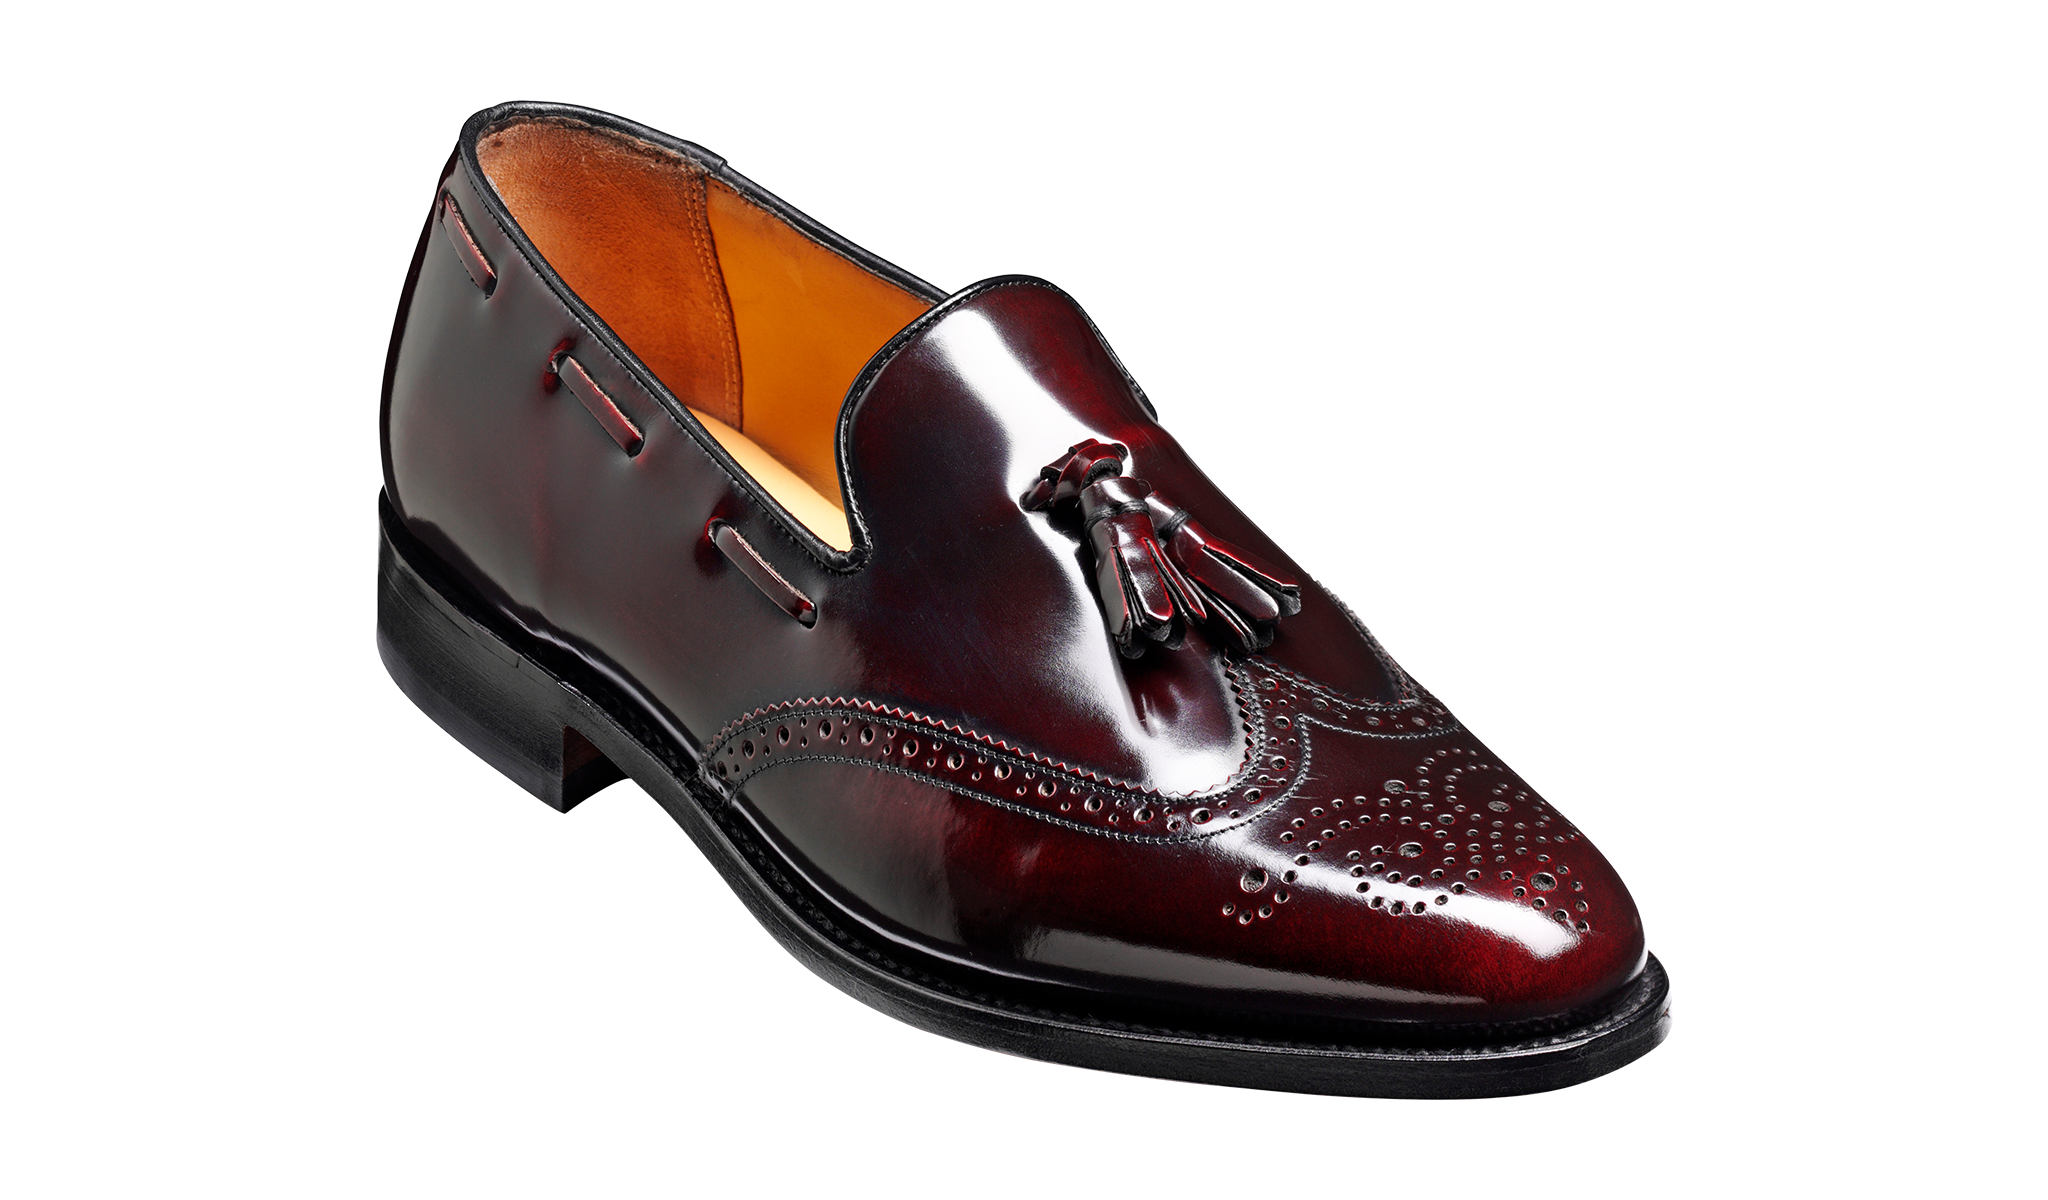 Clive - A men's loafer by Barker Shoes. 